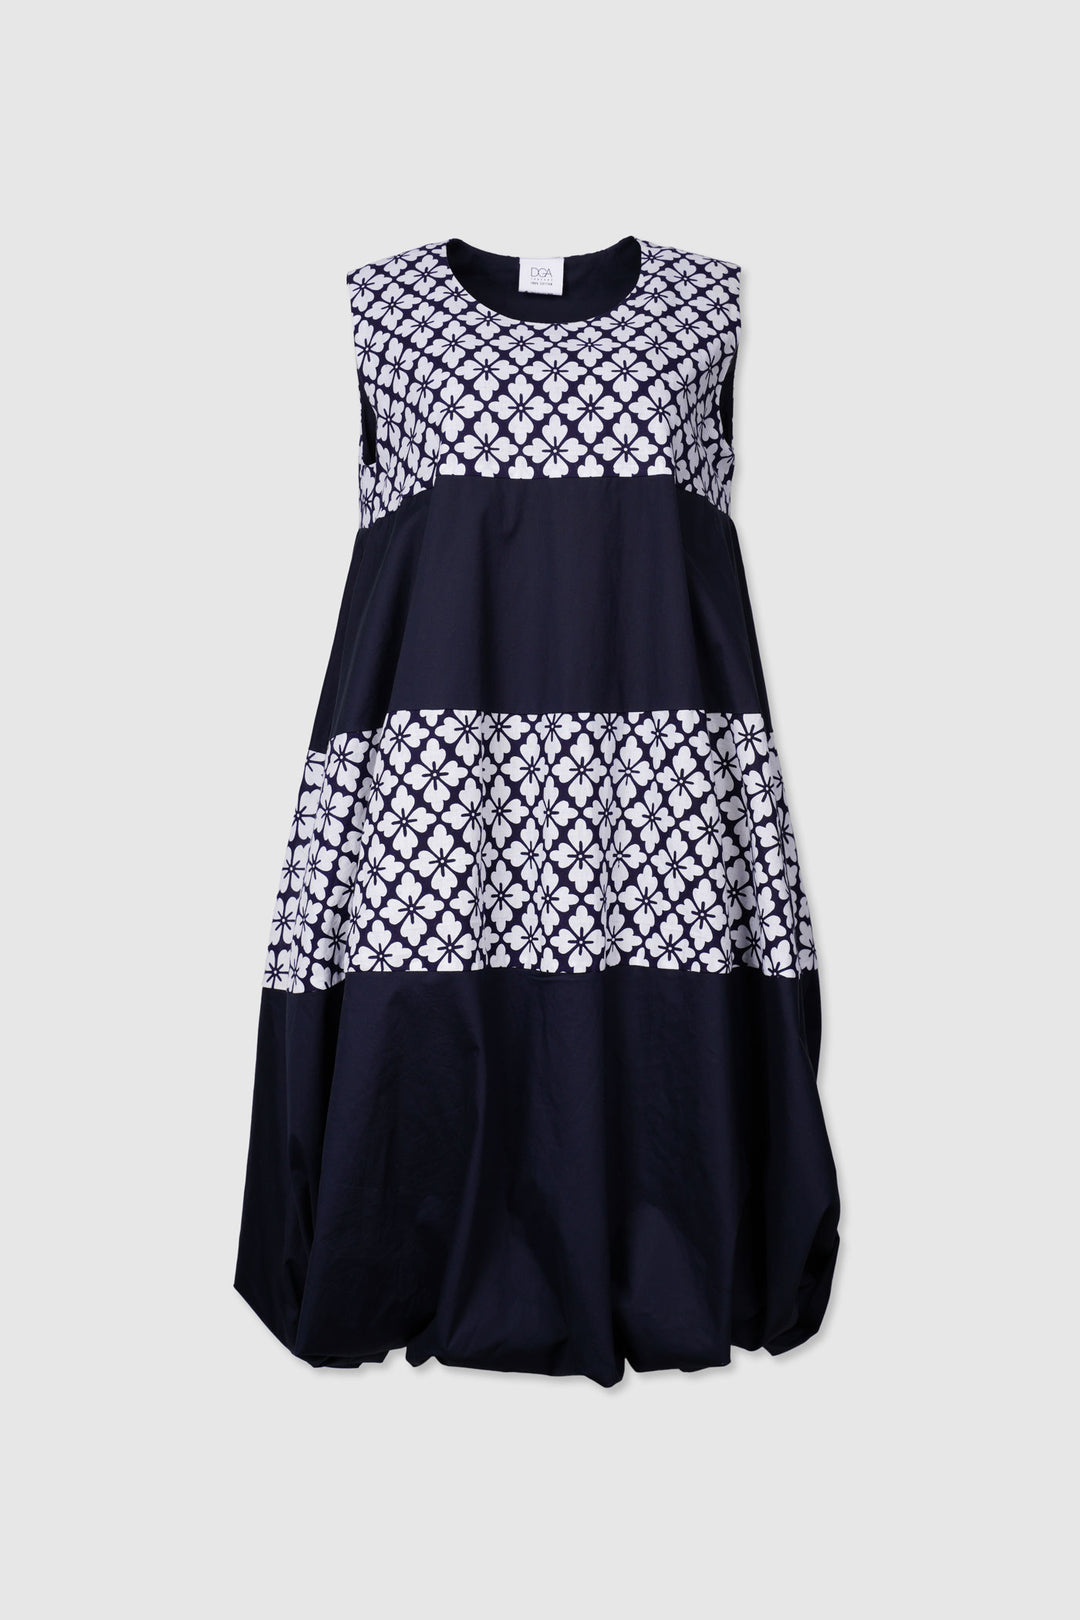 Sleeveless Cotton Blue and White Patterned Bubble Dress